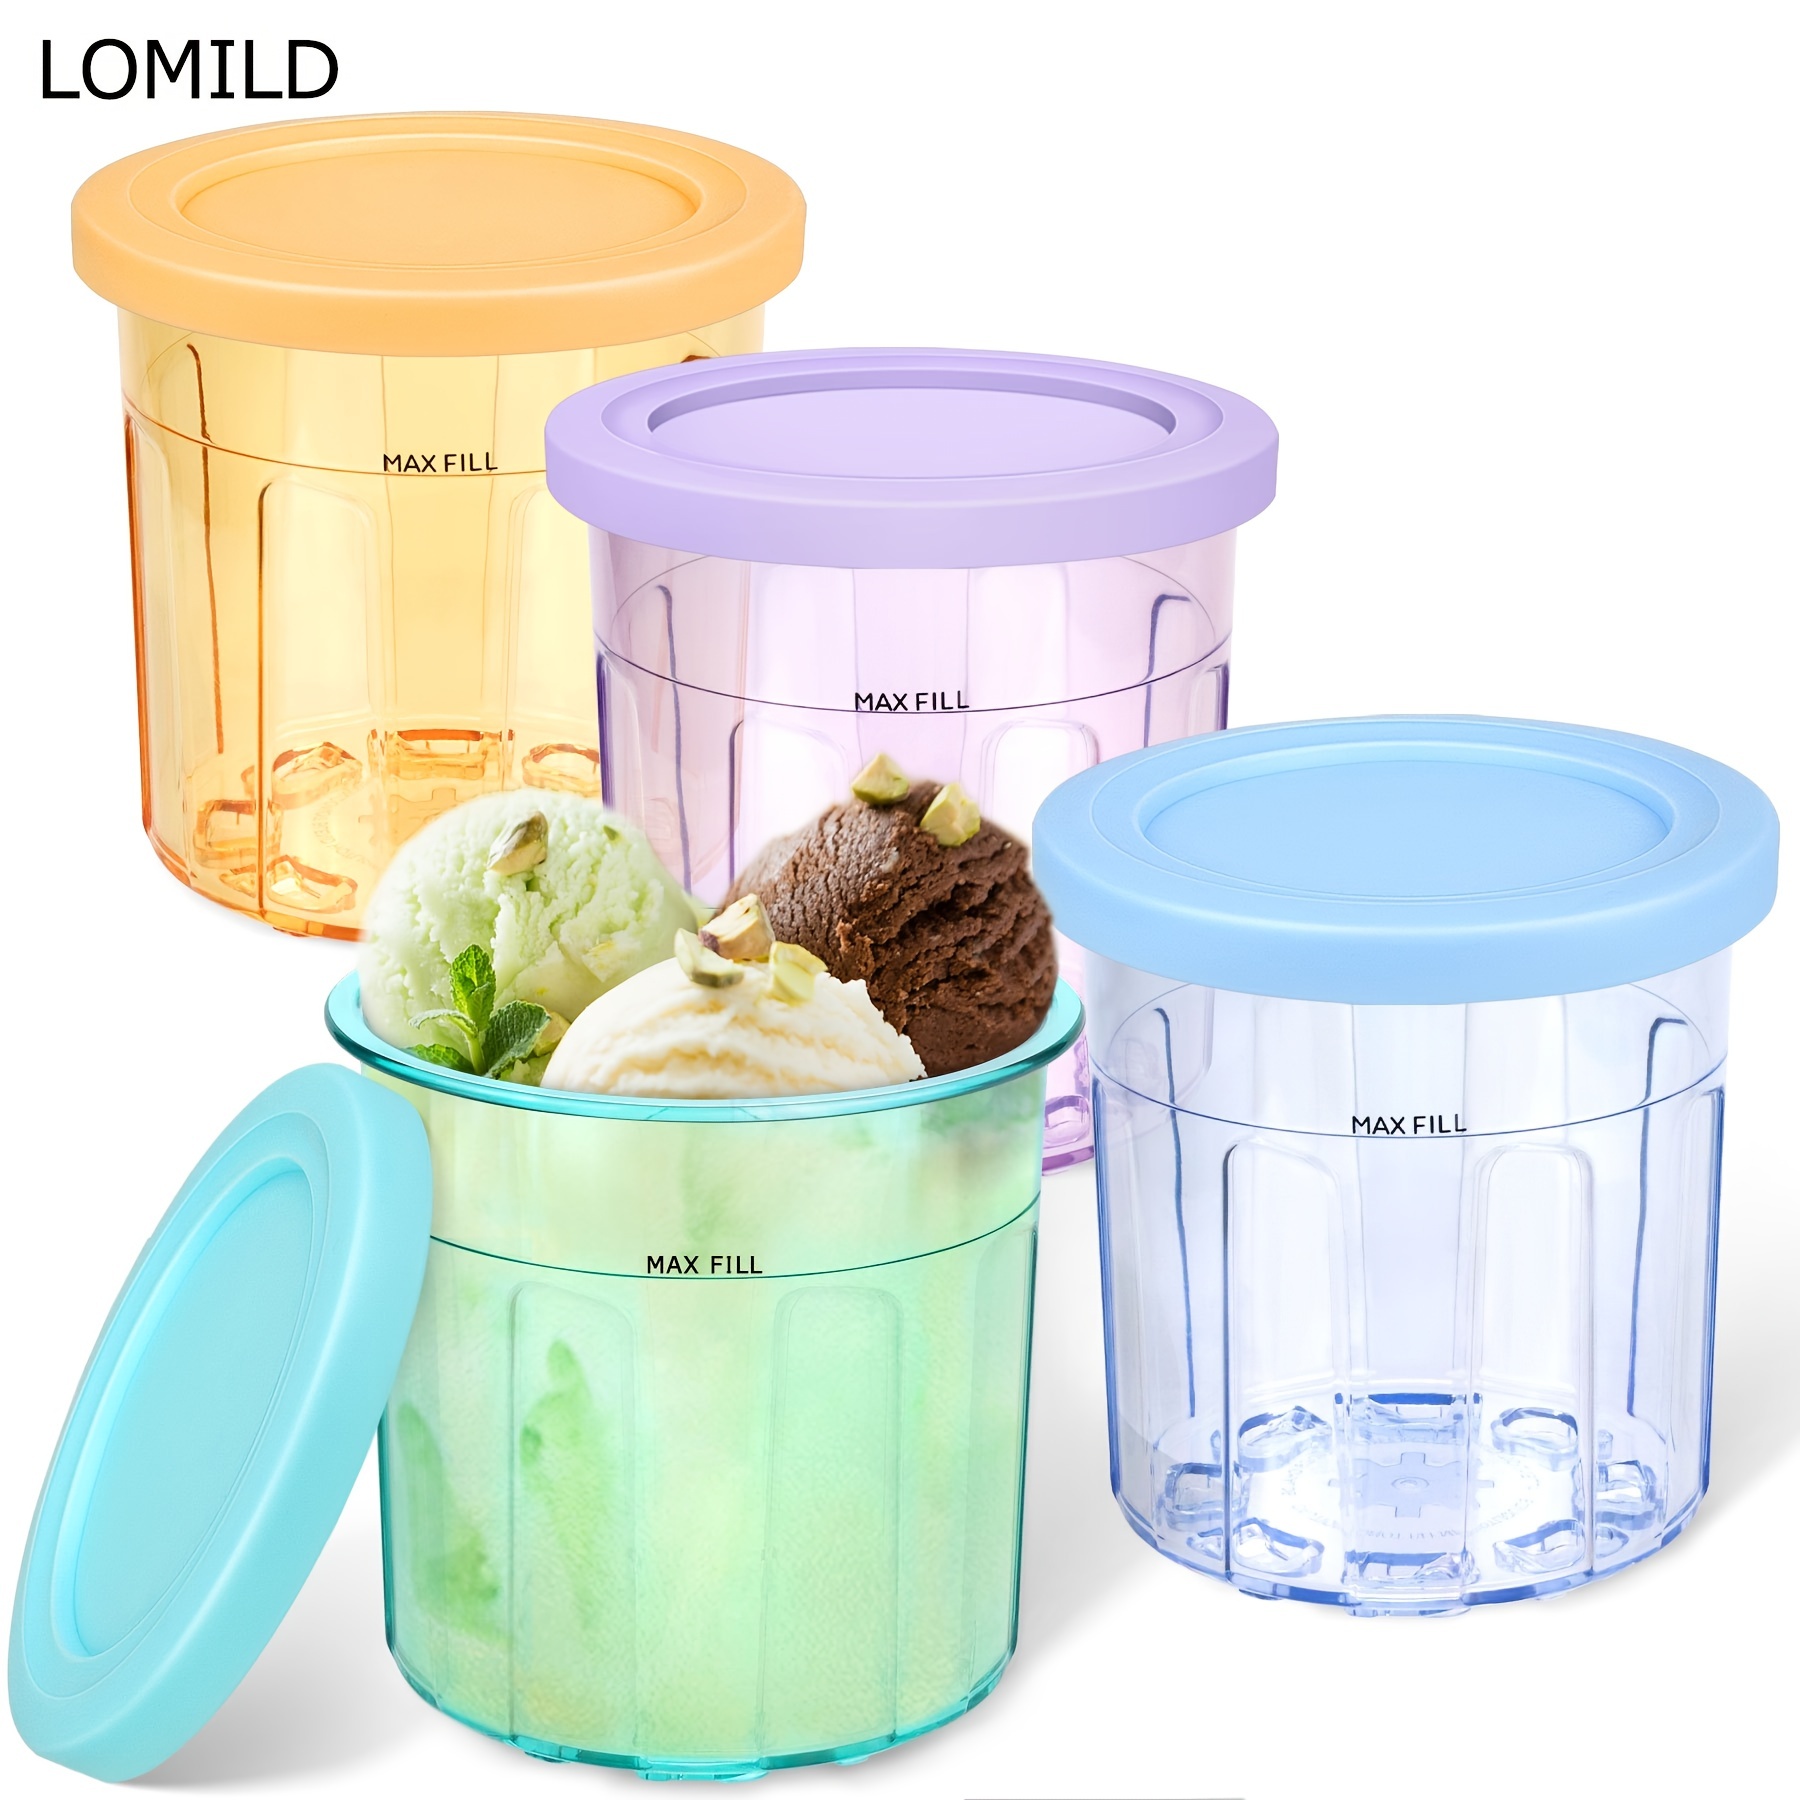 LOMILD Containers Replacement For Ninja Creami Pints And Lids,16oz Cups  Compatible With Ninja NC301 NC300 NC299, Dishwasher Safe - 4pcs